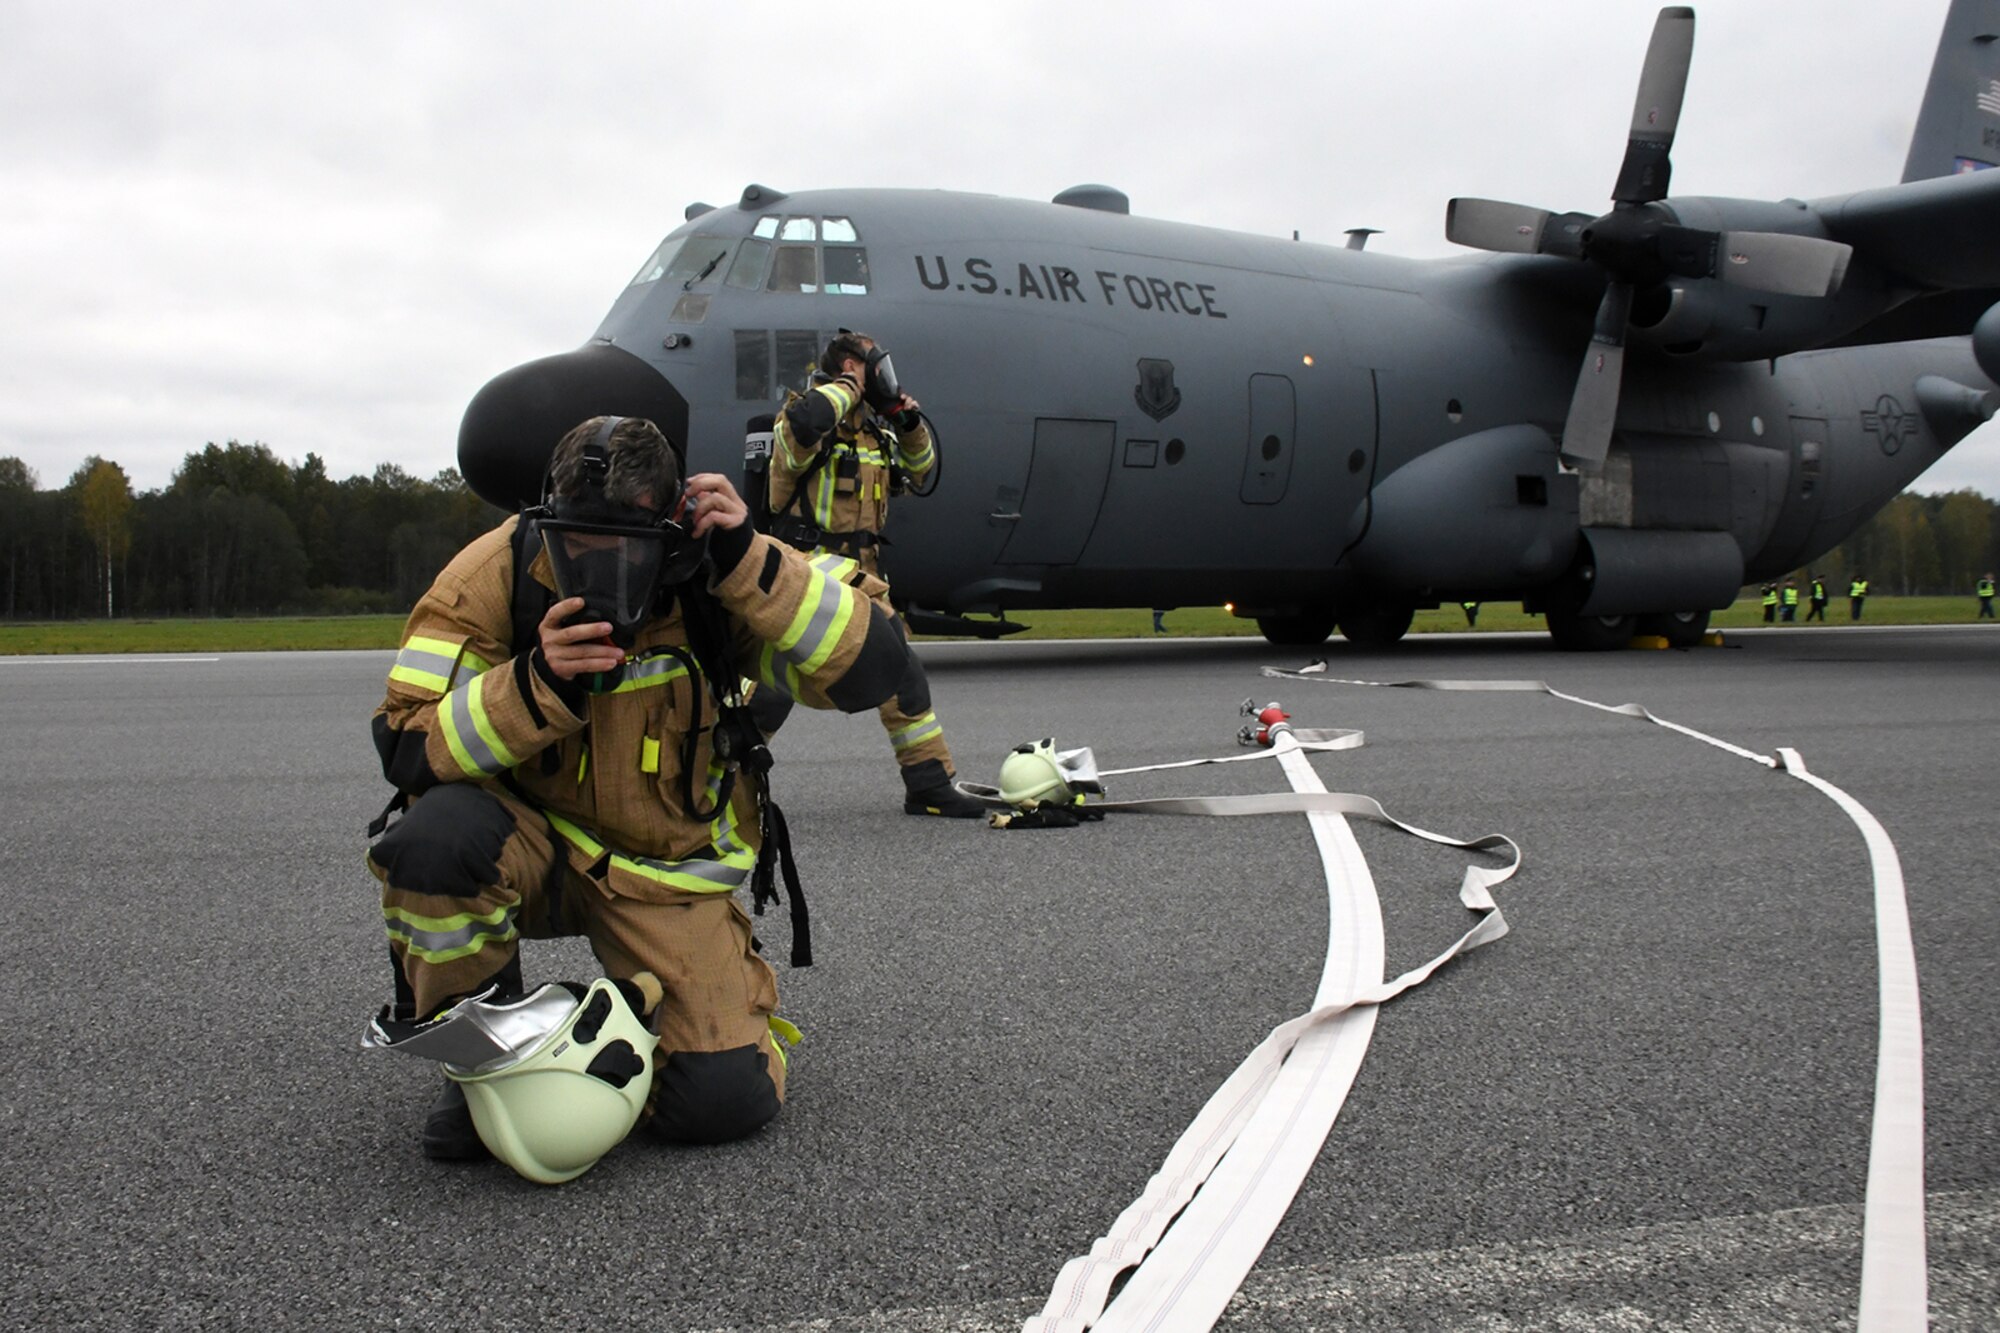 Latvian fire and rescue professionals arrive on the runway at Lielvarde Air Base, Latvia, where a C-130H from Dobbins Air Reserve Base, Ga. is positioned in a simulated crash during Sky Fist, Oct. 6, 2016. Sky Fist was a bilateral, aircraft mishap training exercise designed to strengthen the partnership between the U.S. and Latvia. (U.S. Air Force photo by Staff Sgt. Alan Abernethy)